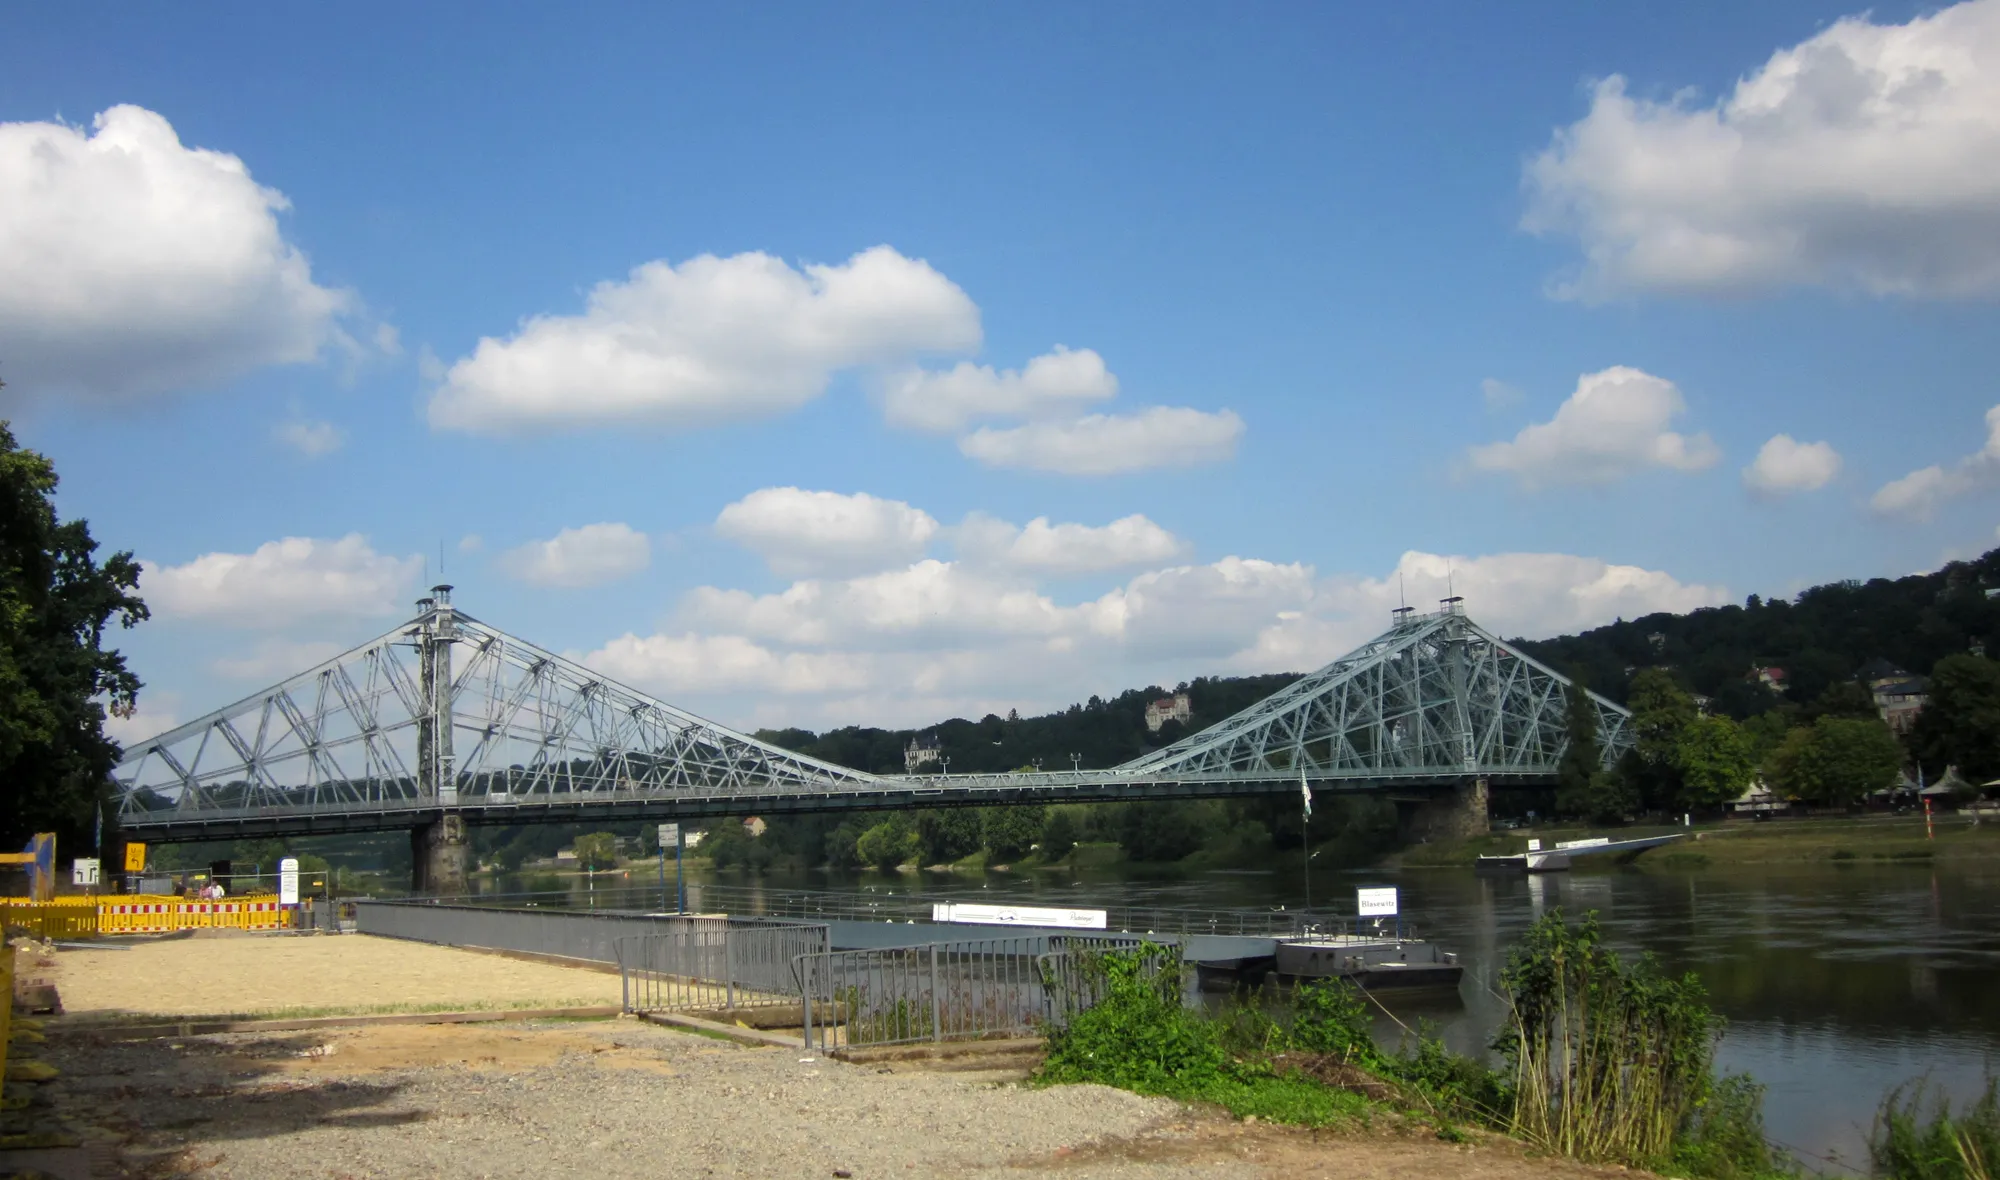 Photo showing: "Das Blaue Wunder", the Loschwitzer Brücke over the Elbe, south of Dresden